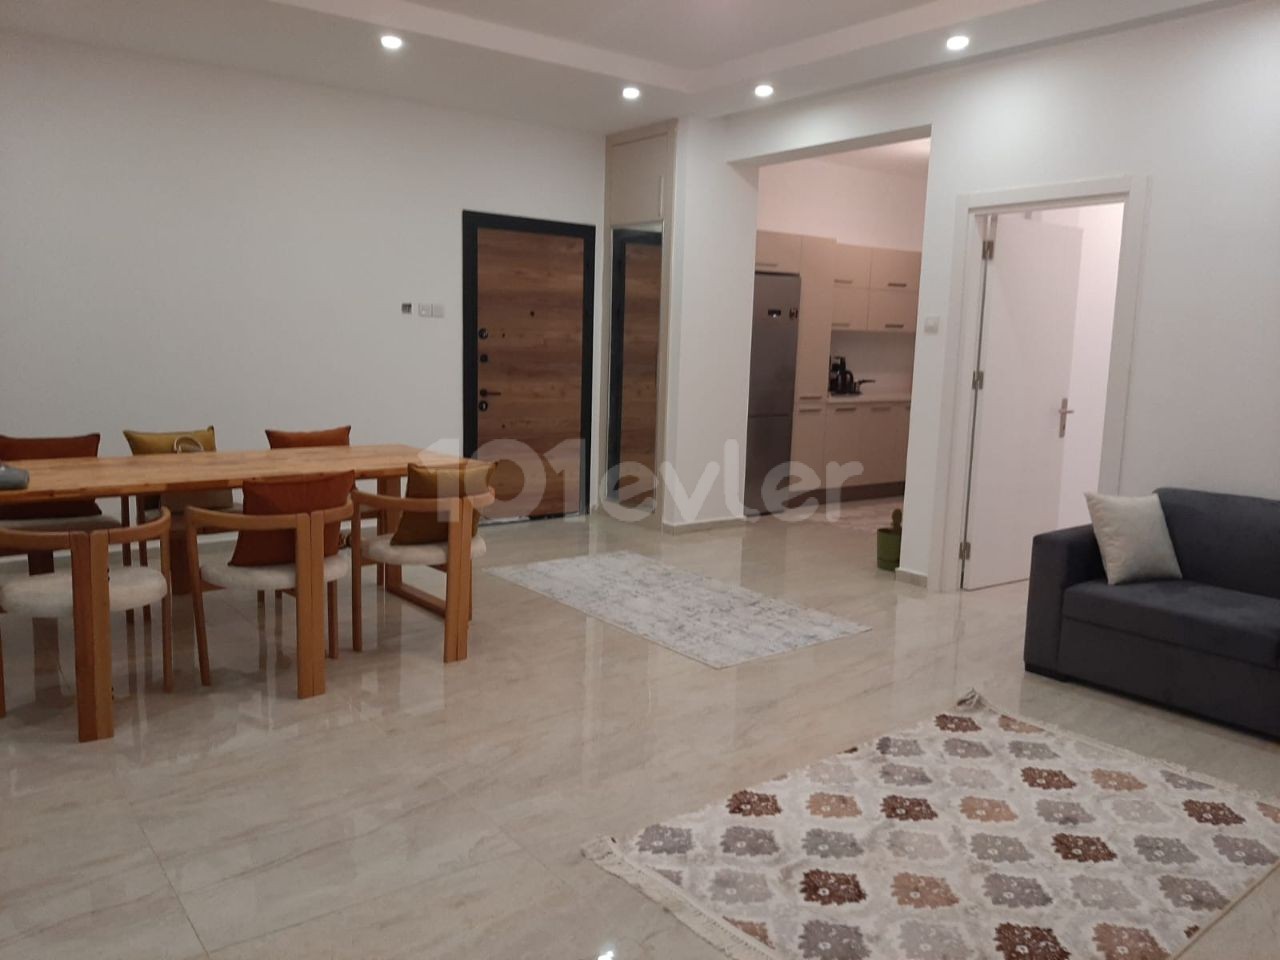 LUXURY FLATS FOR INVESTMENT IN GÜZELYURT